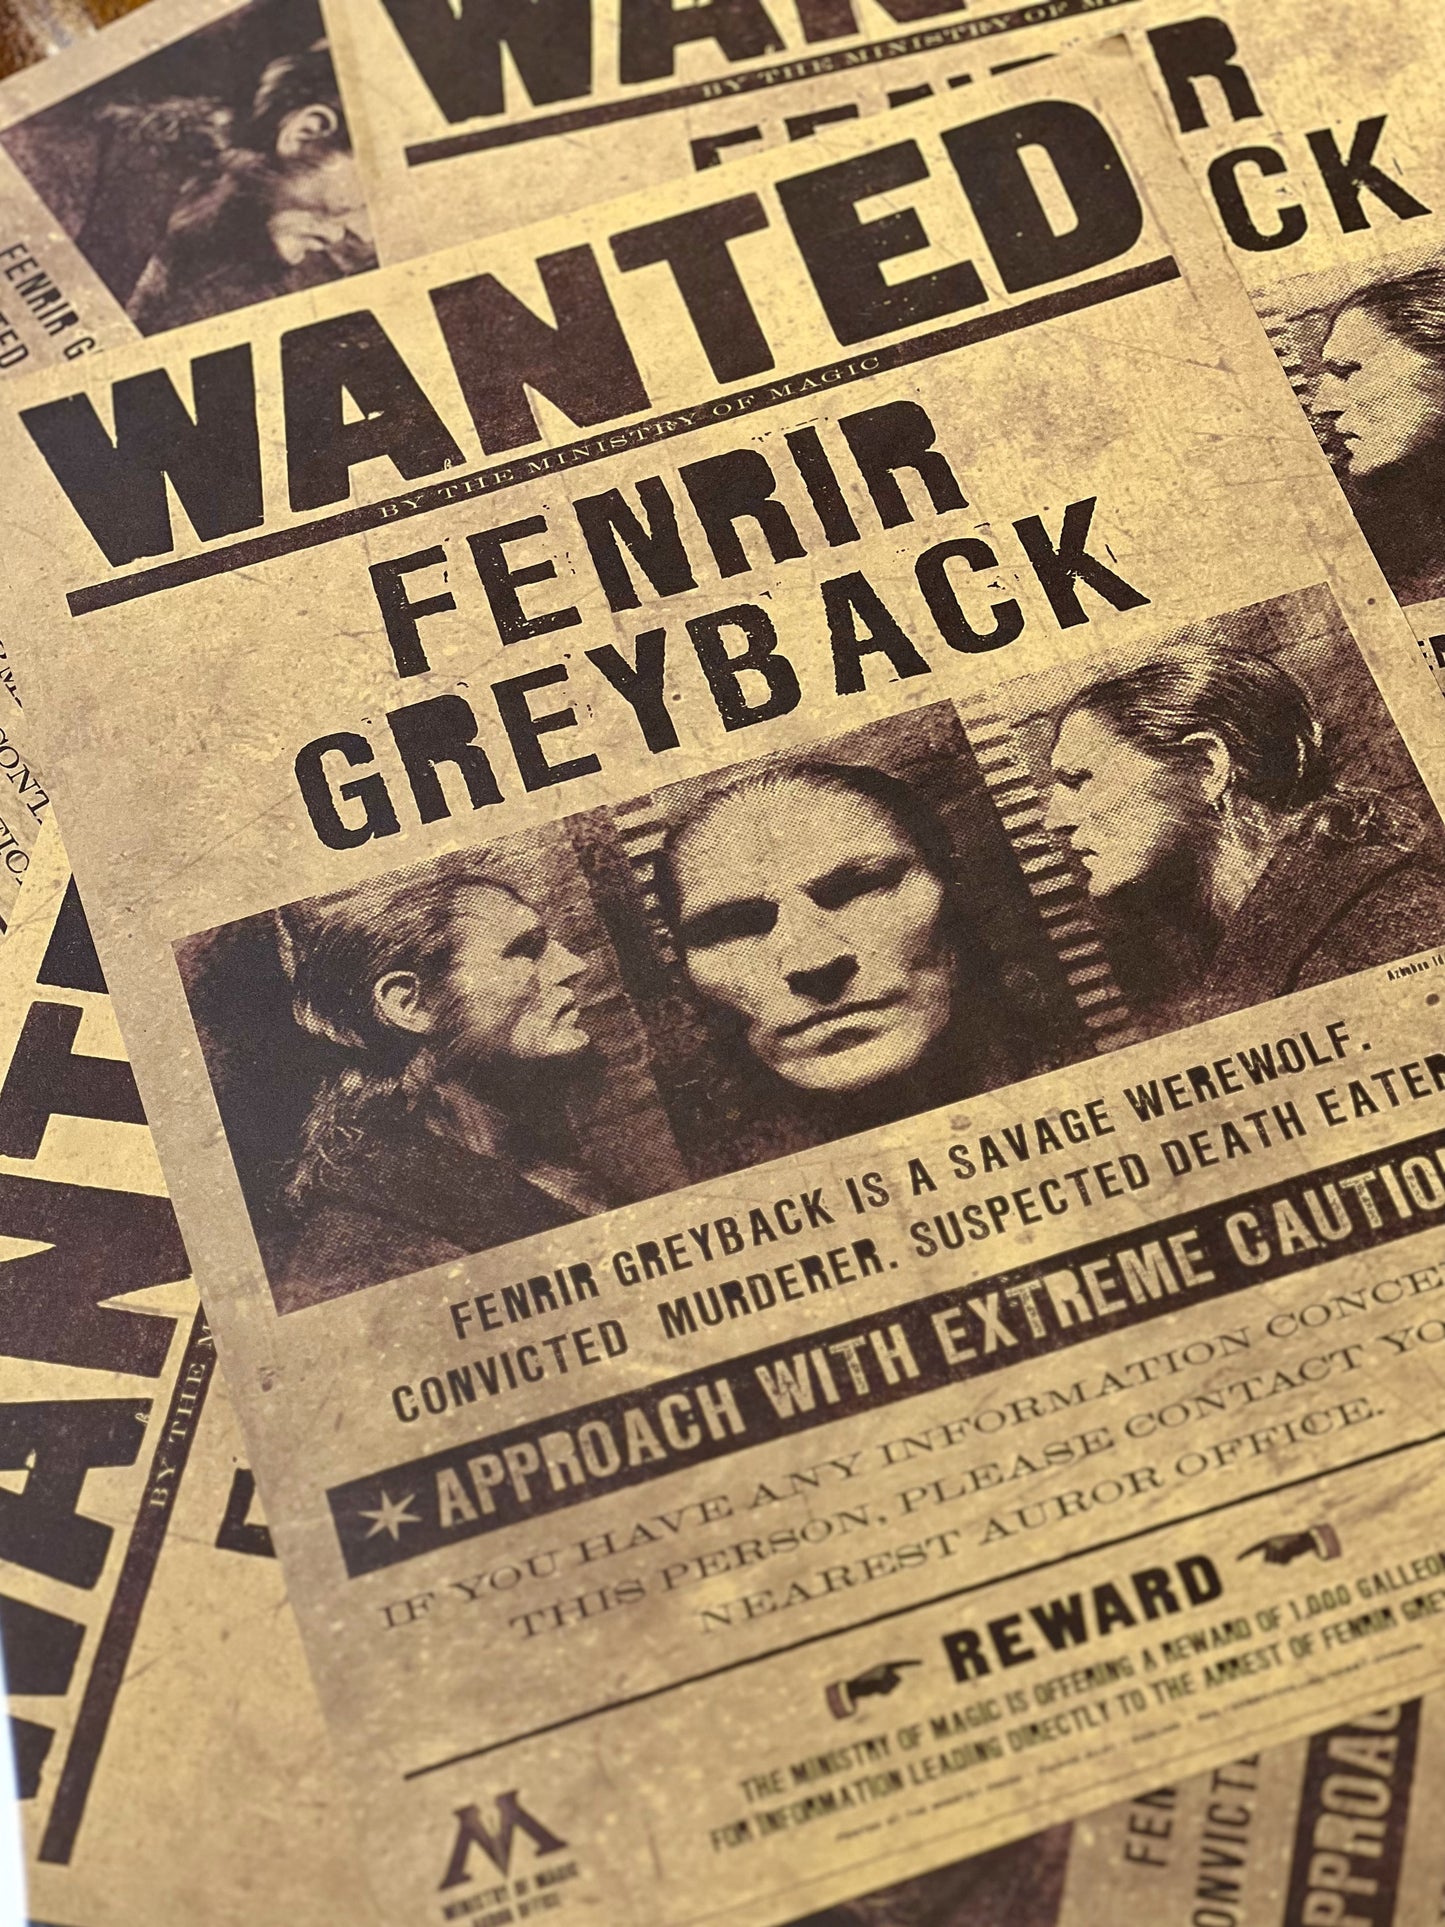 Poster "Wanted by Fenrir Greyback"